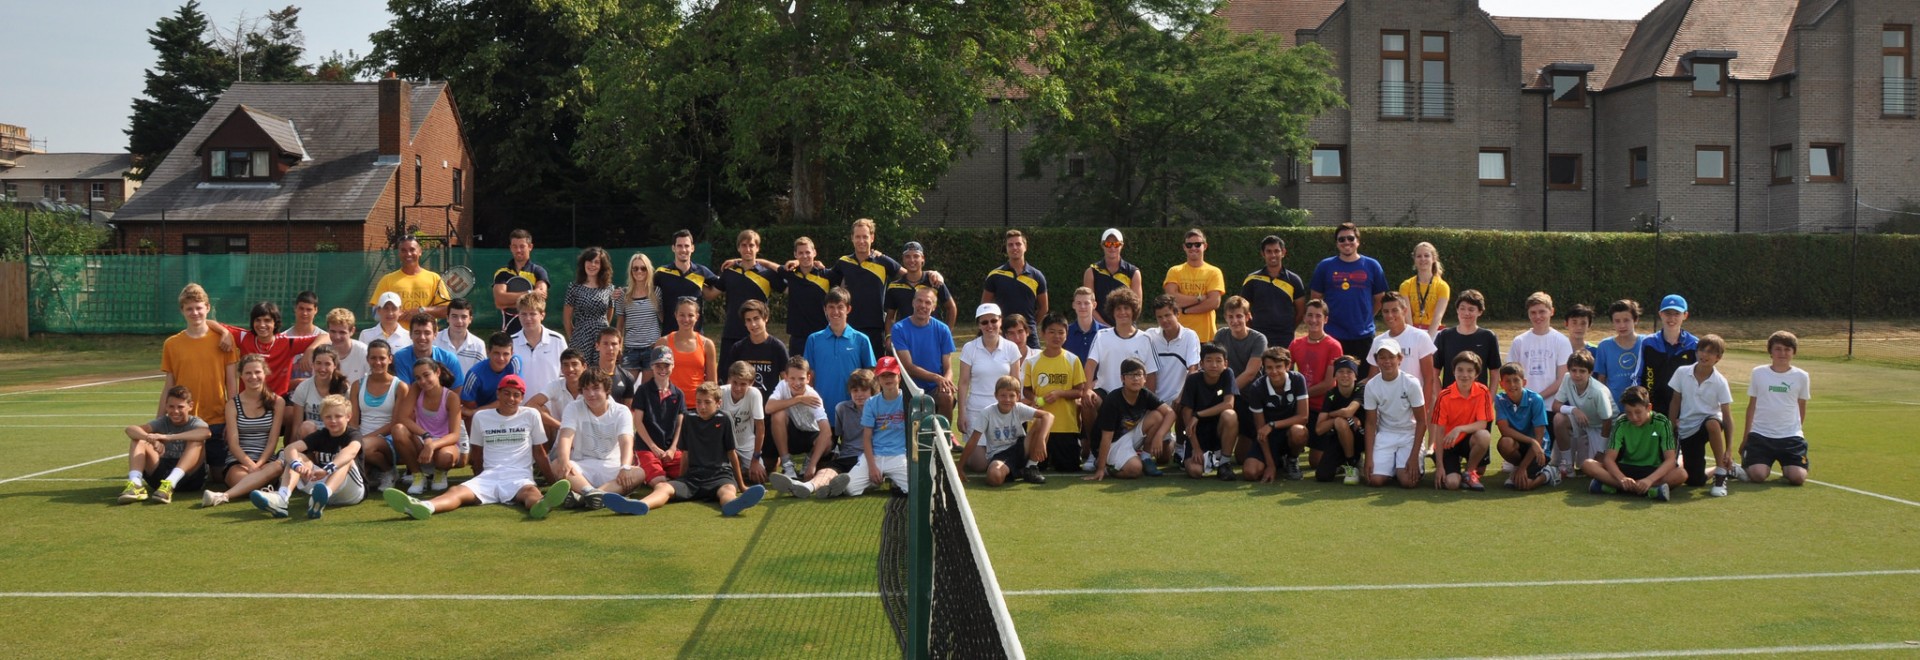 Jonathan Markson Junior Tennis Camp (8-17 Yr Olds) - University of Oxford, Oxford